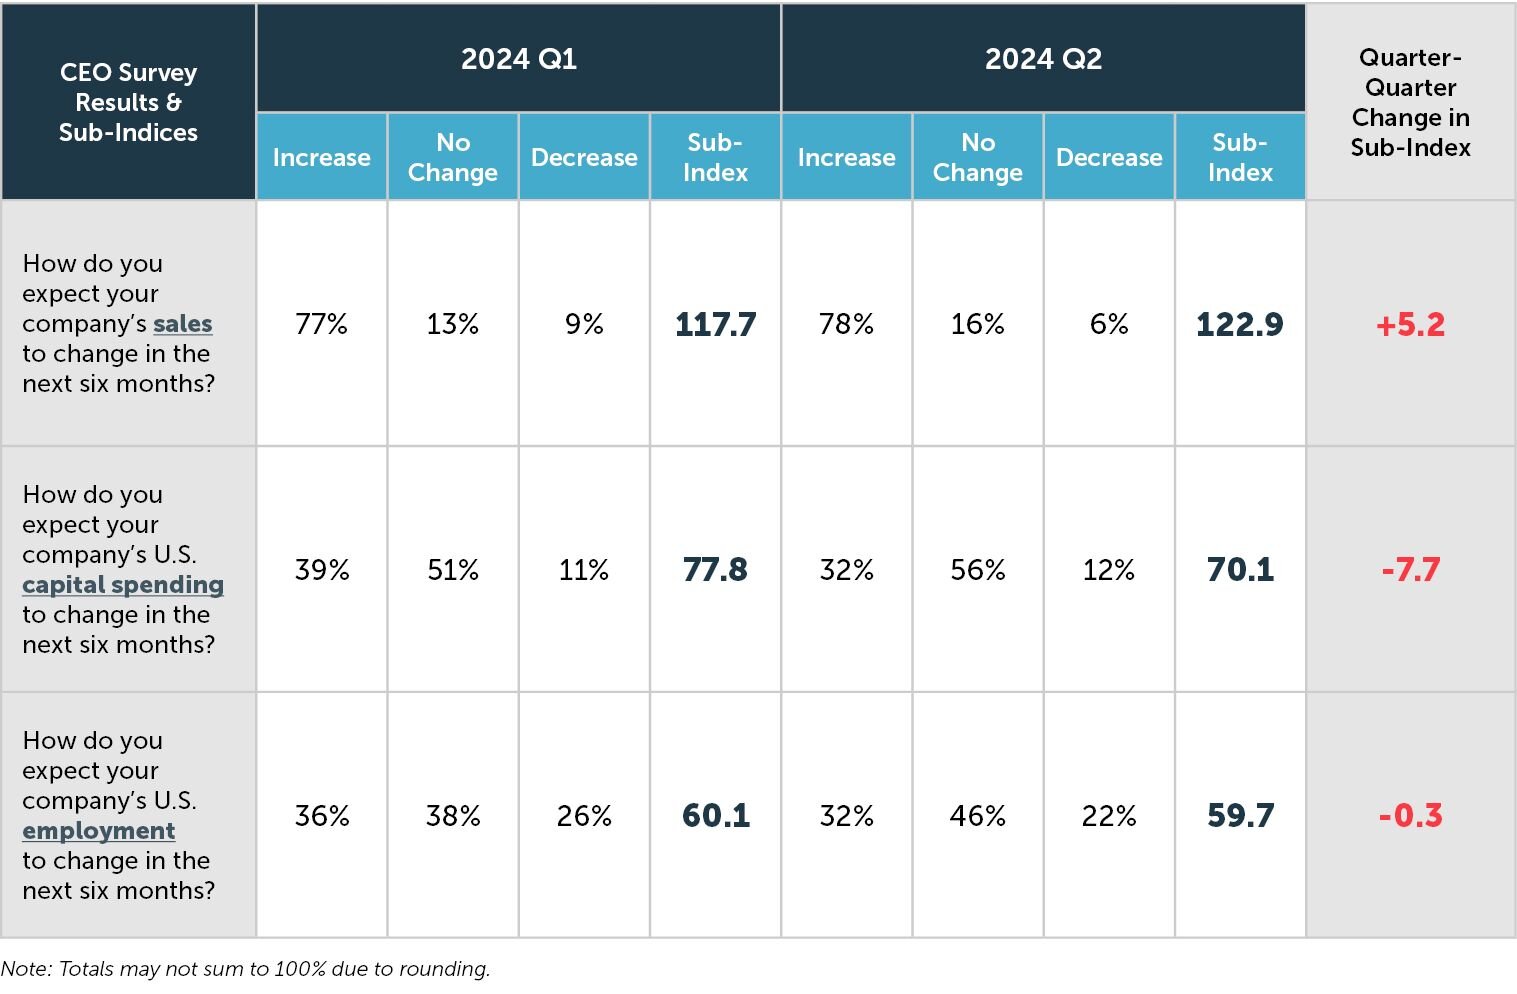 Summary table of 2024 Q2 survey results